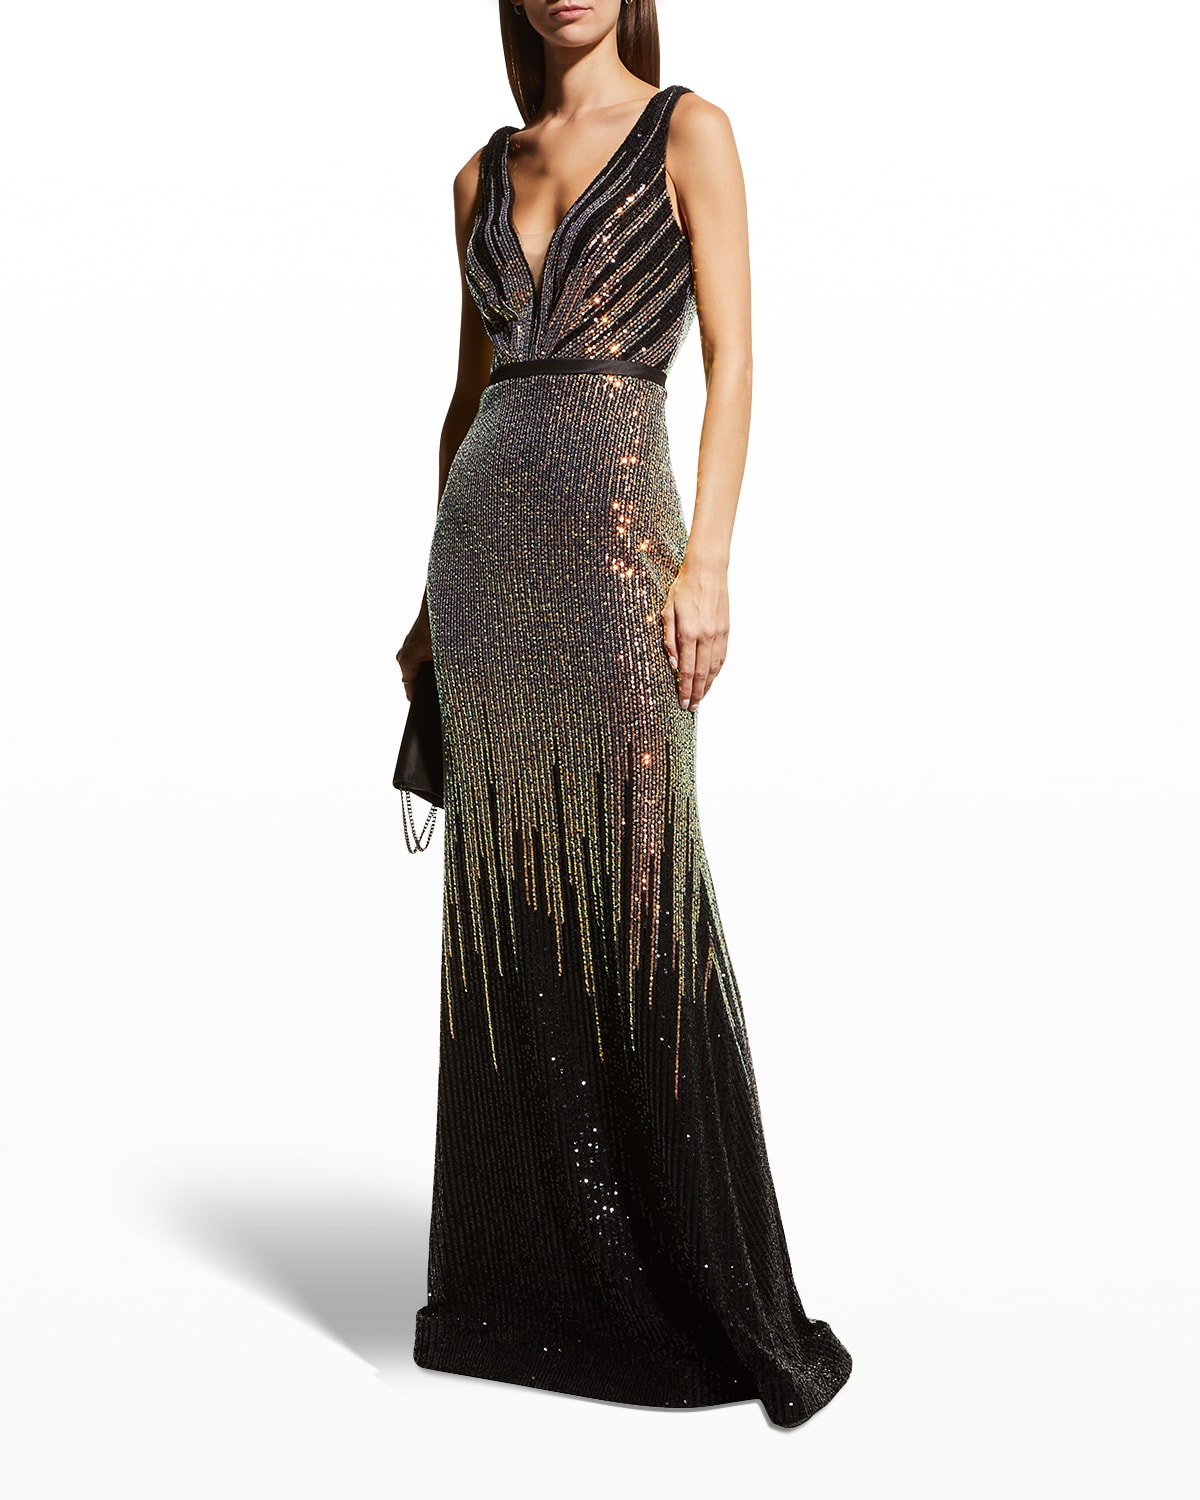 BASIX SLEEVELESS OMBRE SEQUIN GOWN,PROD245560202